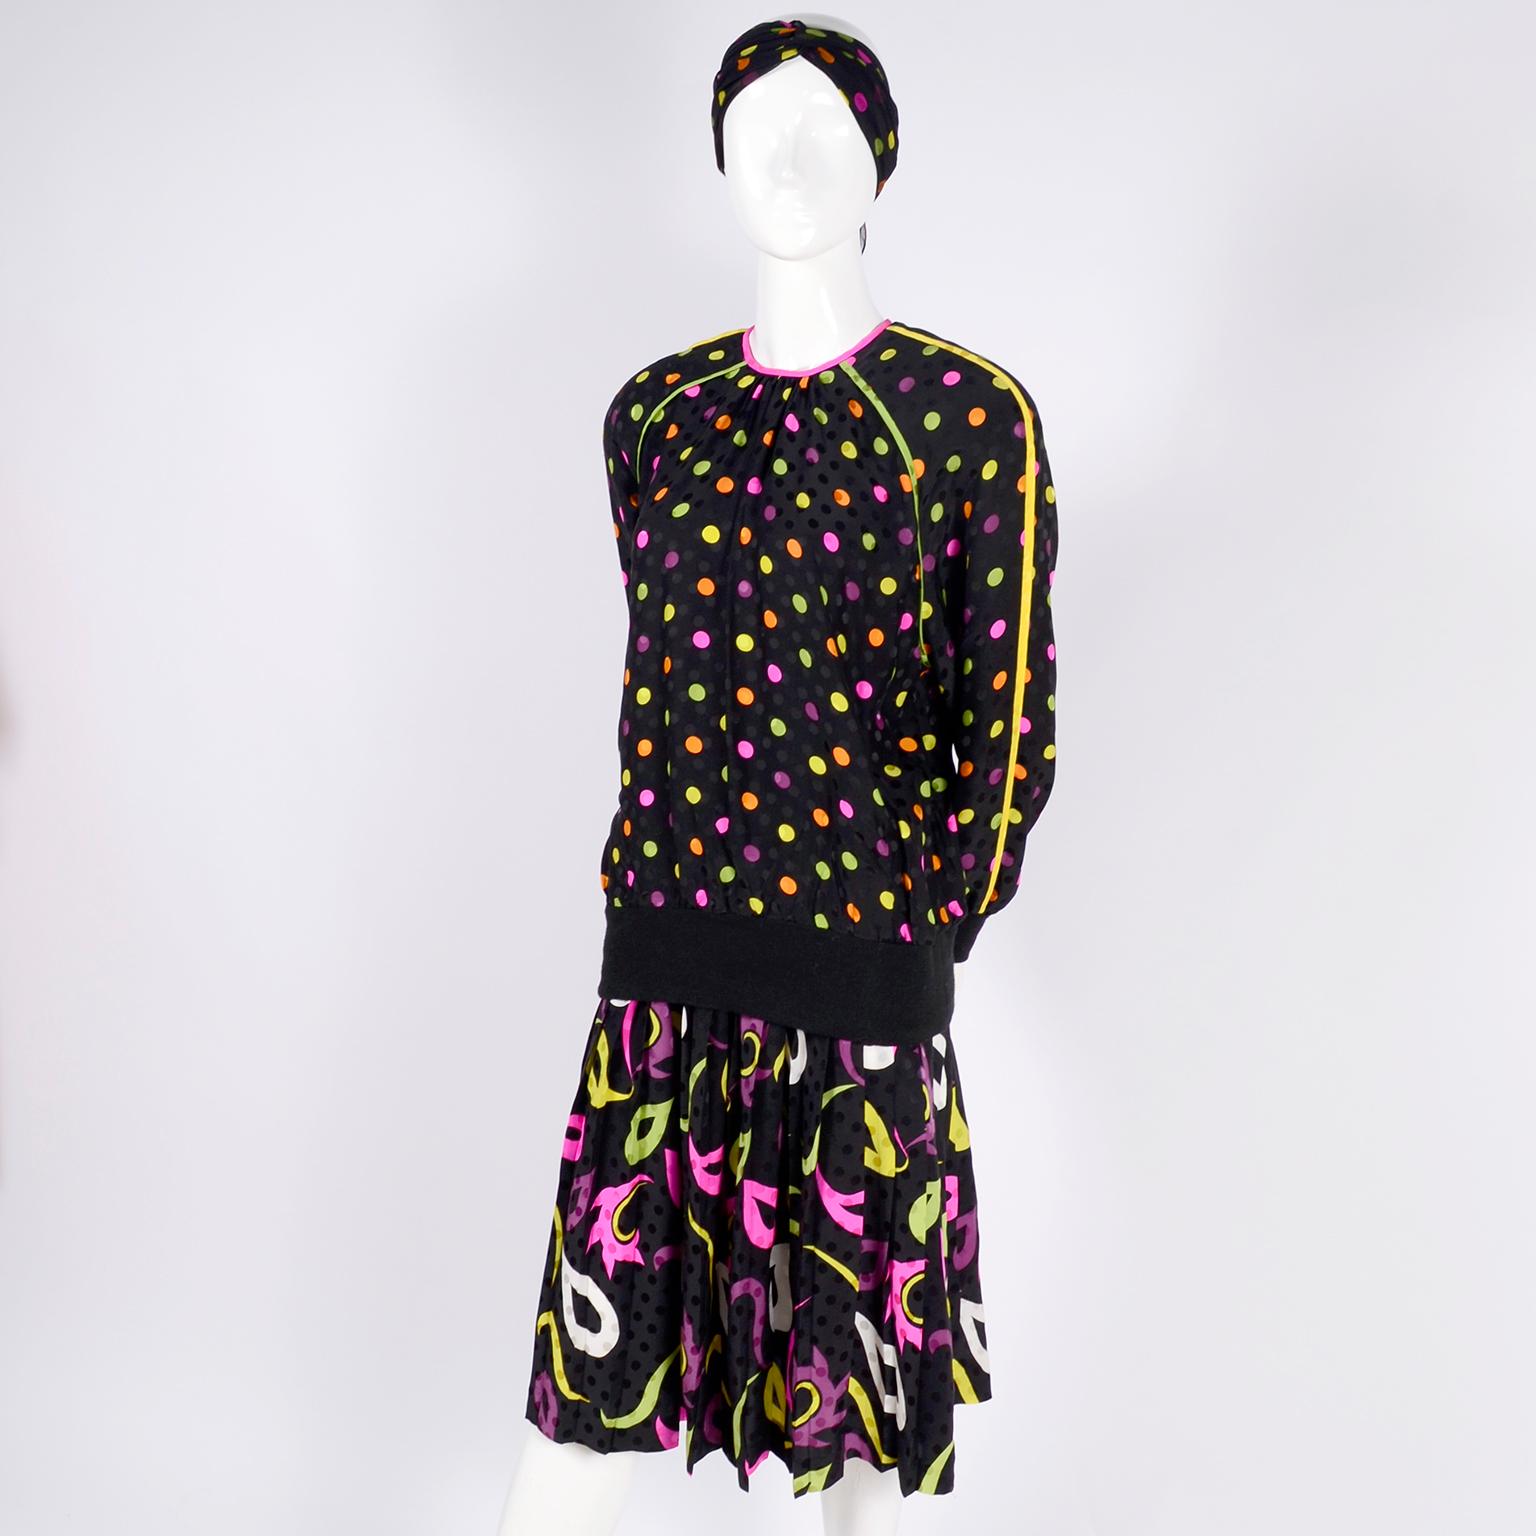 Julie Francis 1980s Silk Dress in Polka Dot Abstract Paisley Pattern Mix & Scarf 5